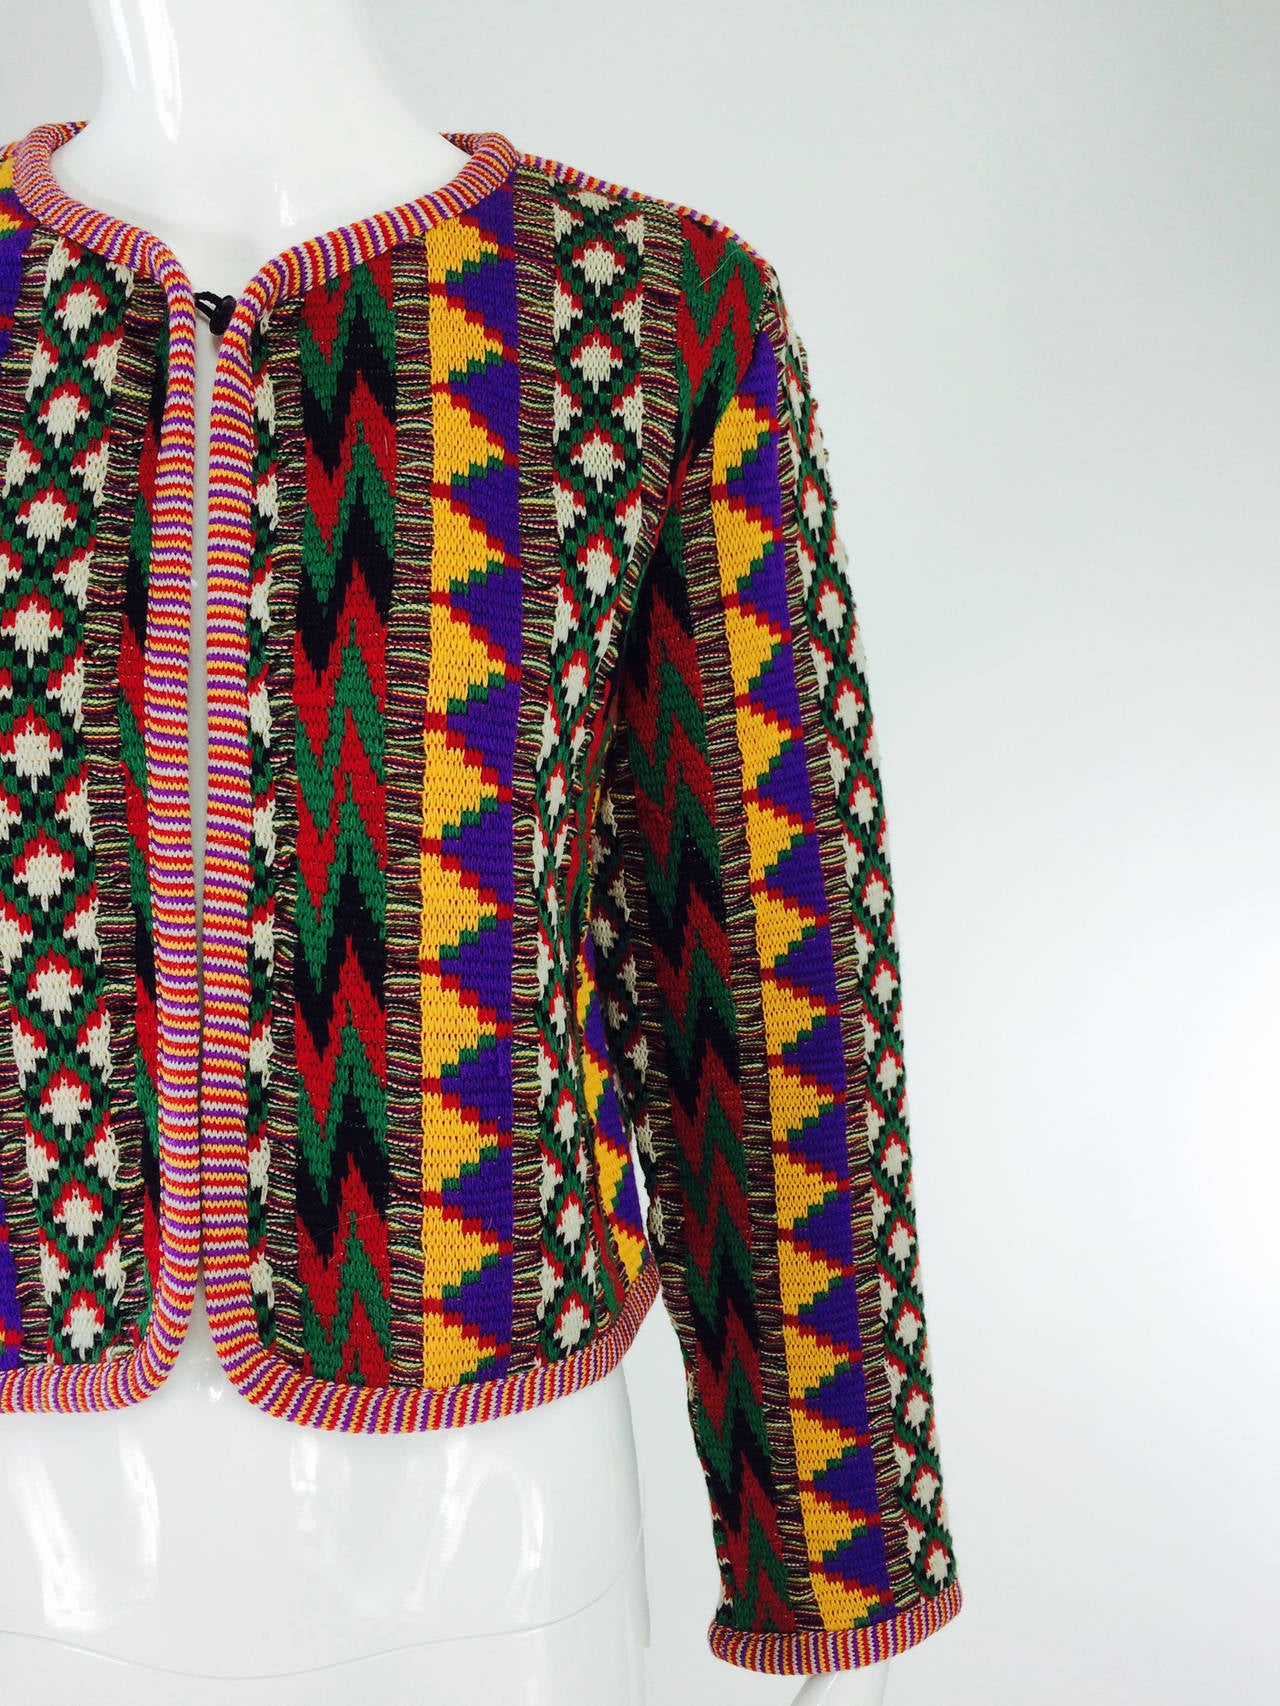 Yves St Laurent Rive Gauche geometric tribal knit sweater 1970s...A bohemian inspired design in deep rich colours...Long sleeve sweater is unlined, closes at the neck with a hook...100% wool...Marked size 38

In excellent wearable condition... All